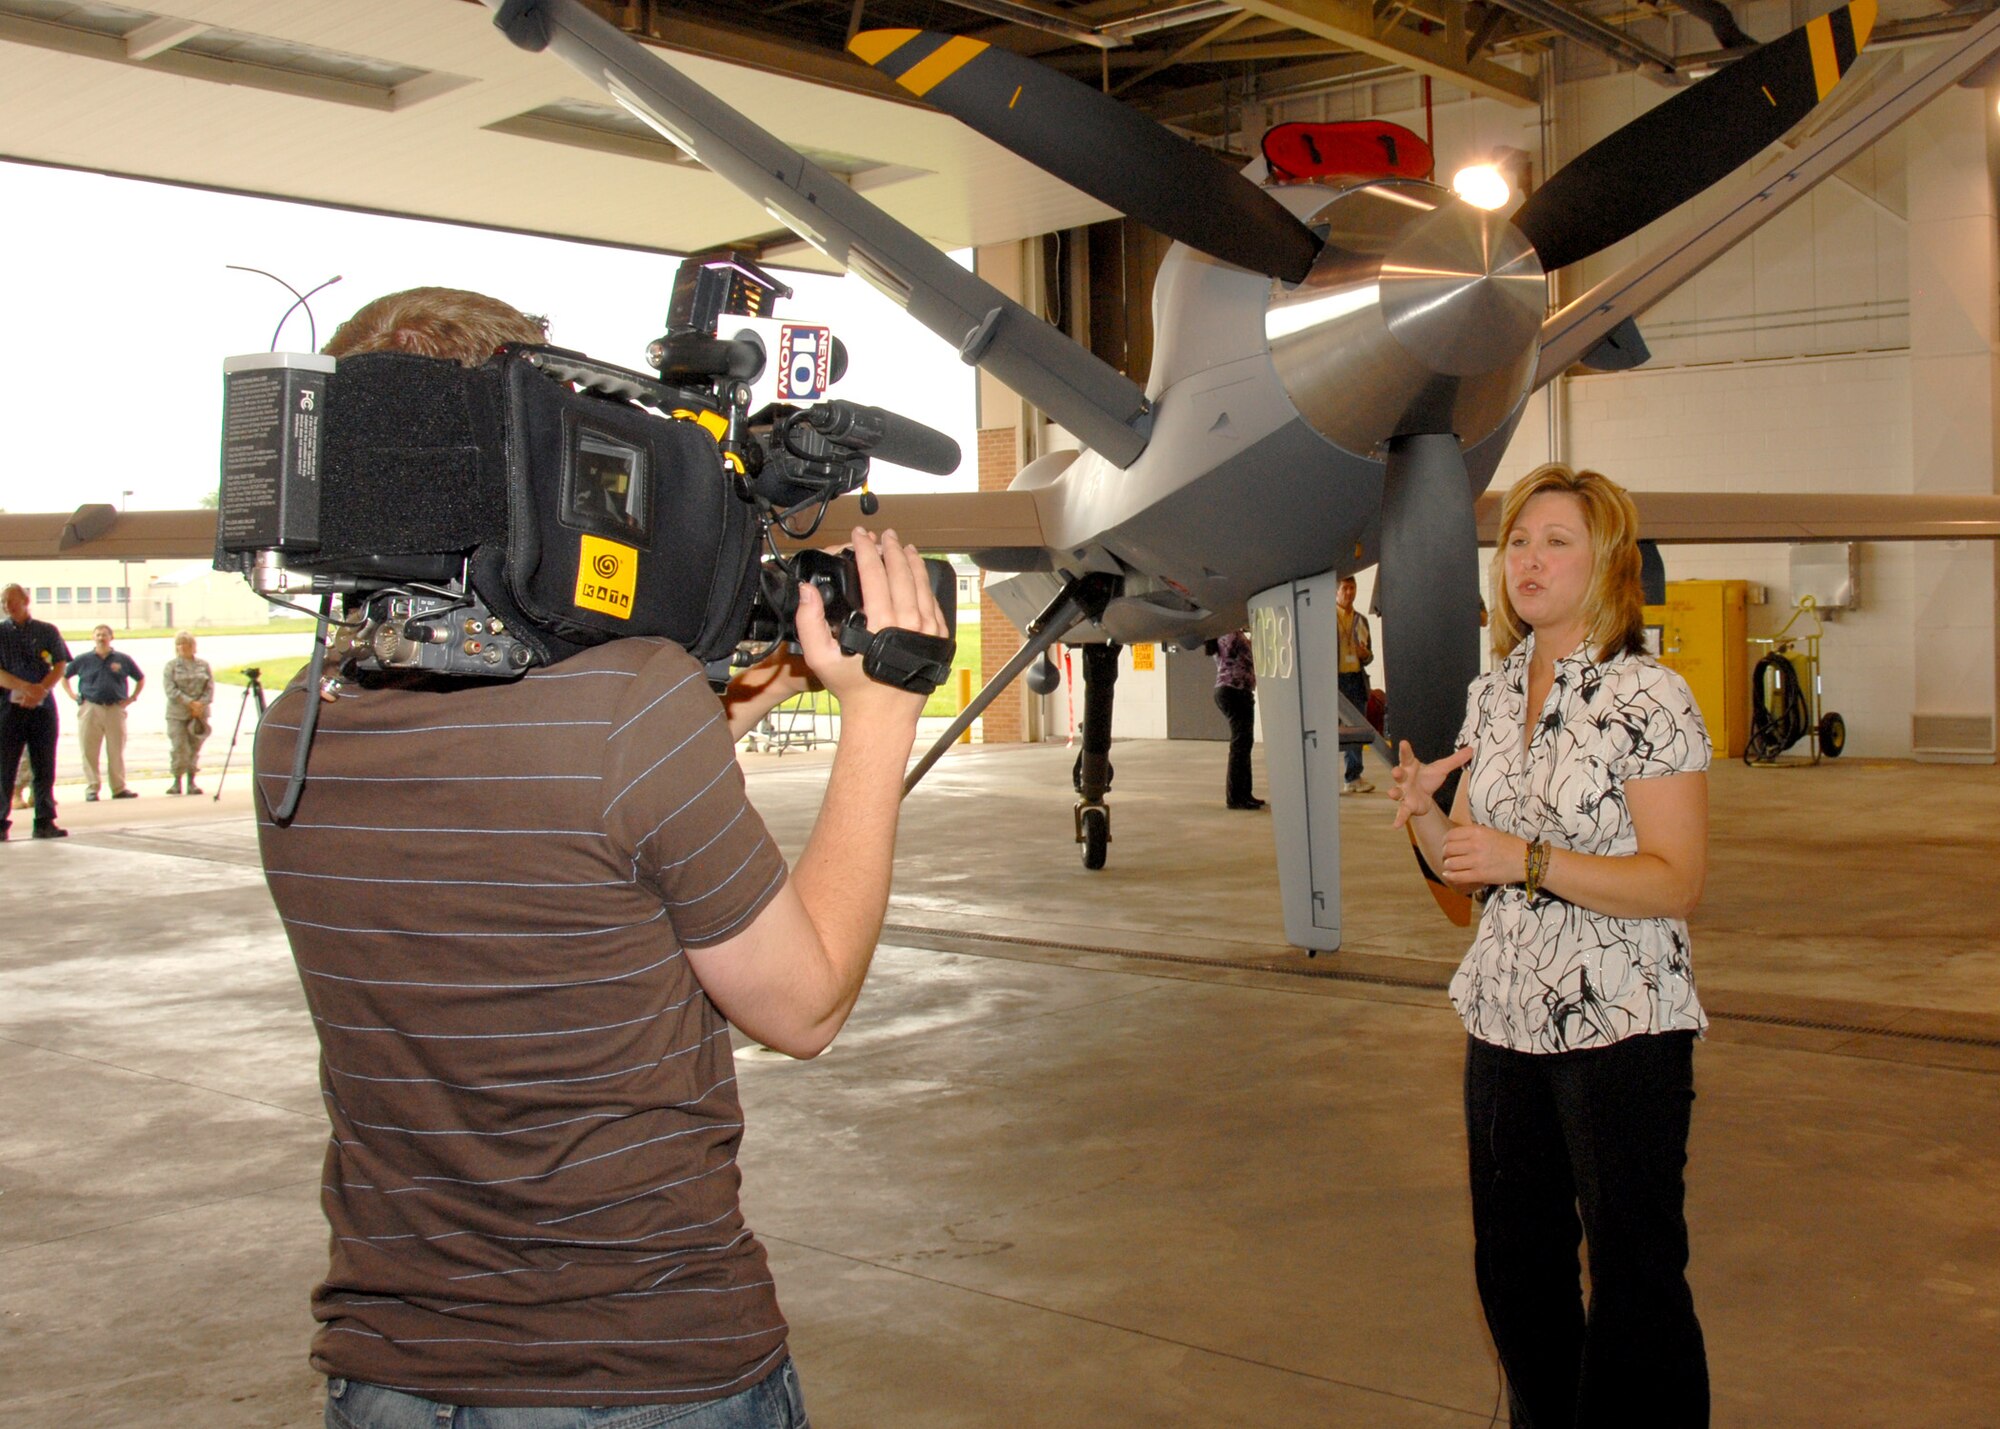 News 10 Now, Syracuse, Reporter Joleene Des Rosiers stands in front of the new MQ-9 Reaper Unmanned Aerial Vehicle while News 10 Now Operations Technician Joseph Comings records at Hancock Field in Syracuse, NY, on 26 June 2009. Des Rosiers and Comings were invited as part of the Media Day event introducing the new MQ-9 Reaper Unmanned Aerial Vehicle mission of the 174th Fighter Wing. (US Air Force photo by Tech. Sgt. Jeremy M. Call/Released)